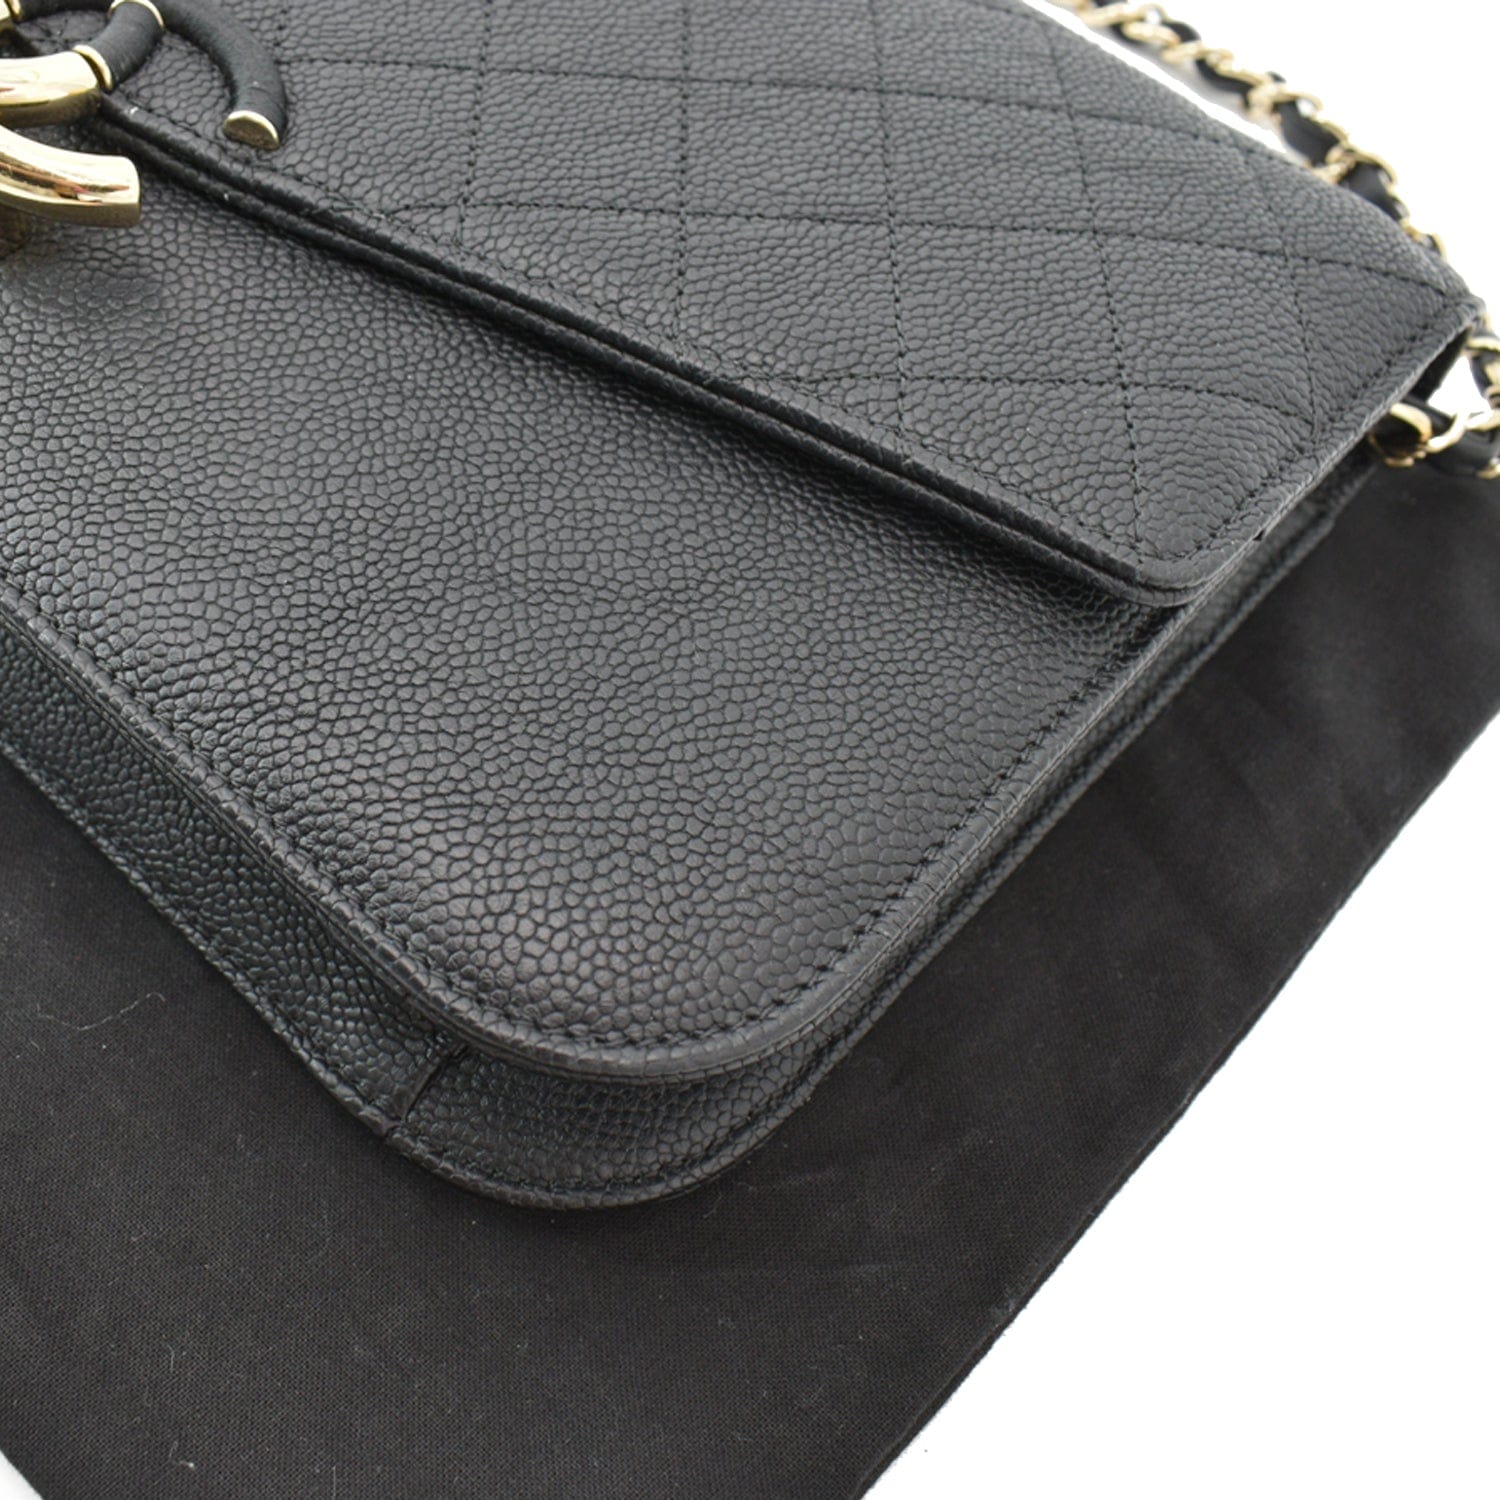 Chanel Black Caviar Quilted Leather Cuba Top Handle Crossbody Bag Chanel